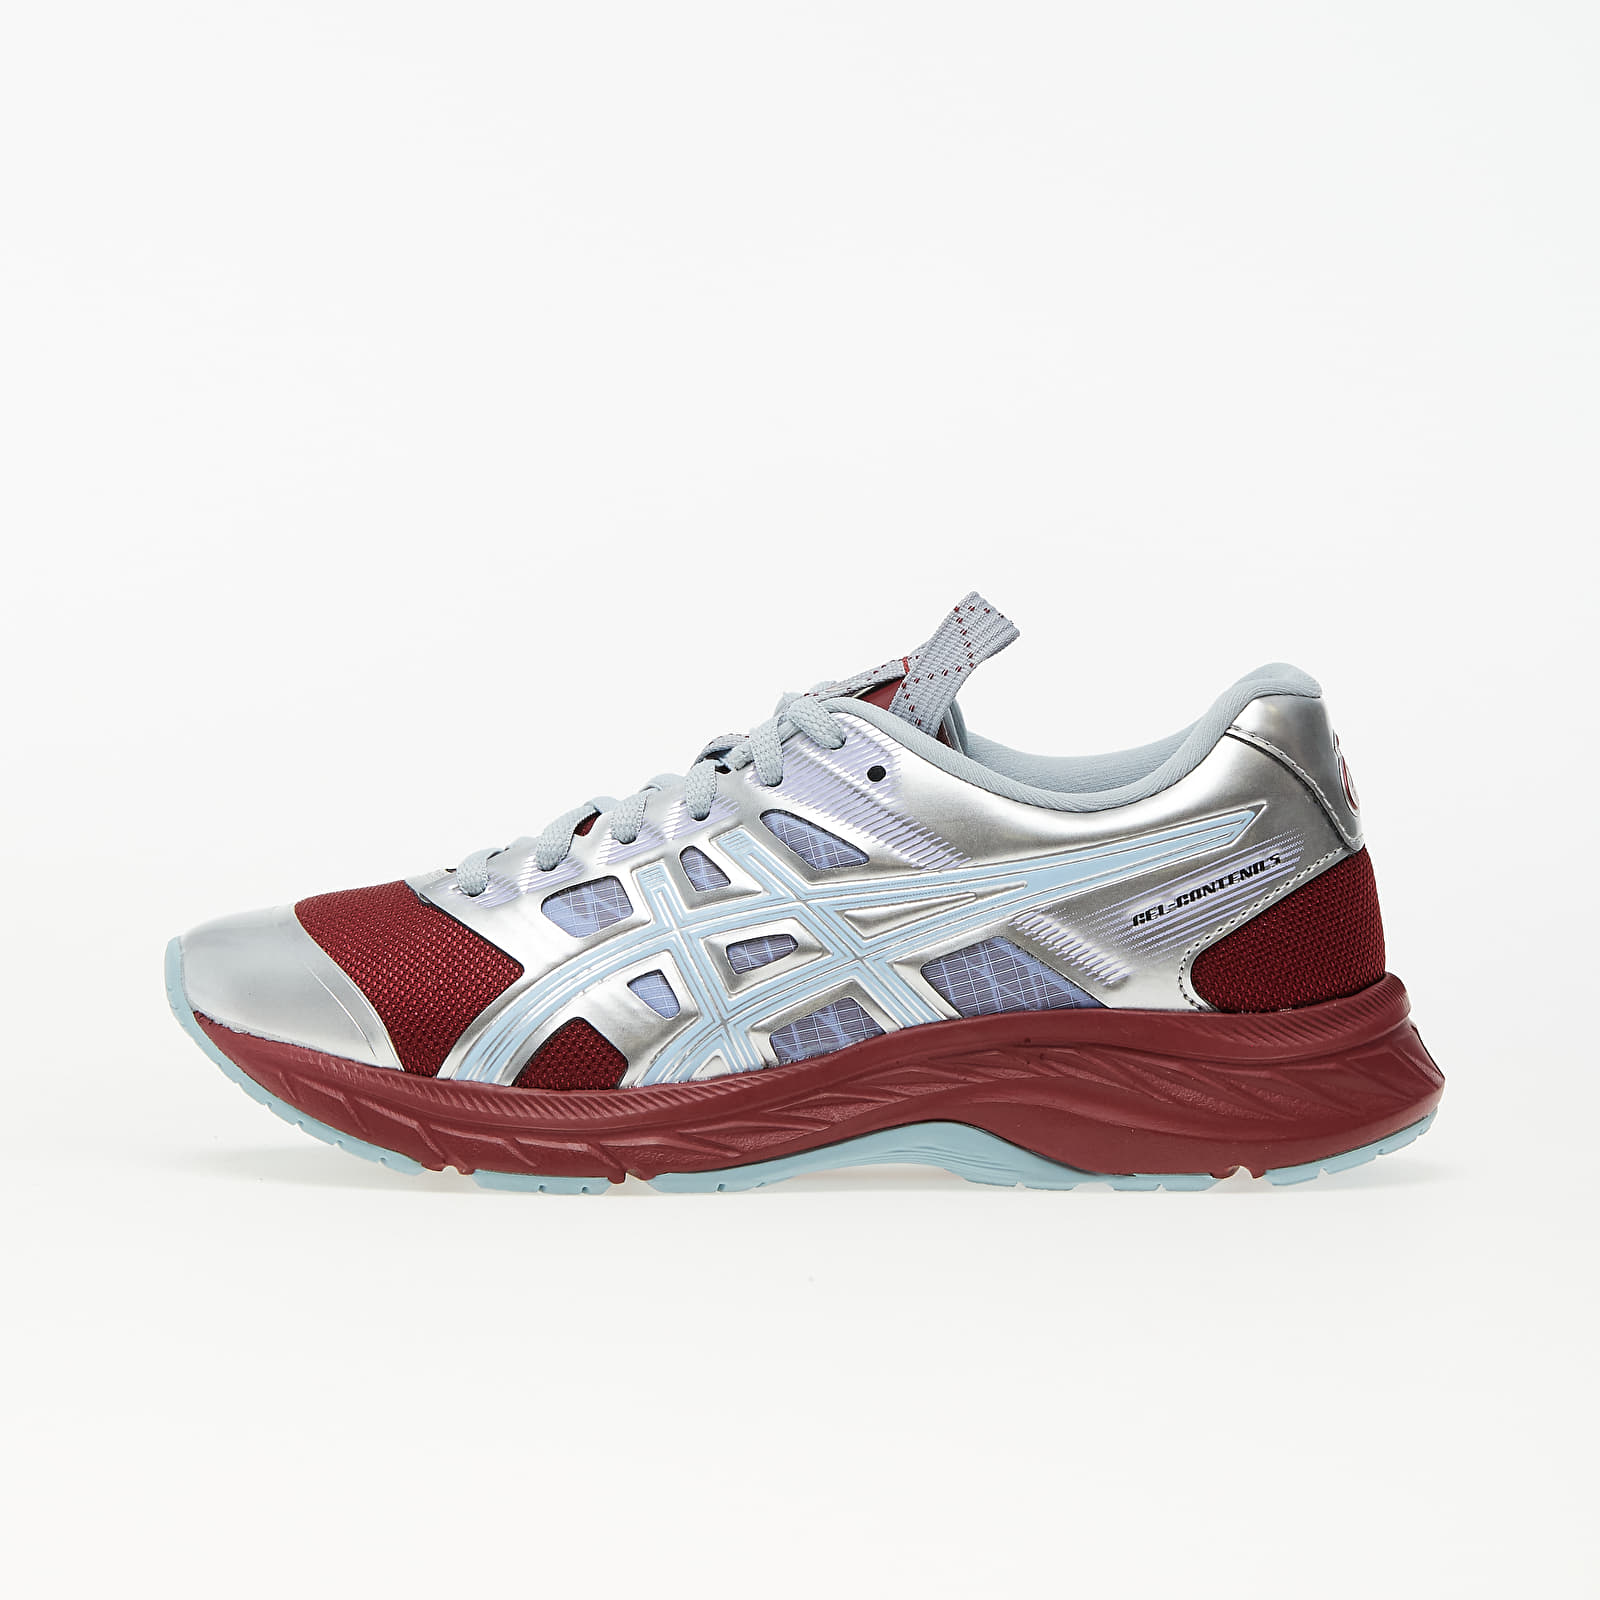 Women's shoes Asics FN2-S GEL-Contend 5 Beet Juice/ Pure Silver